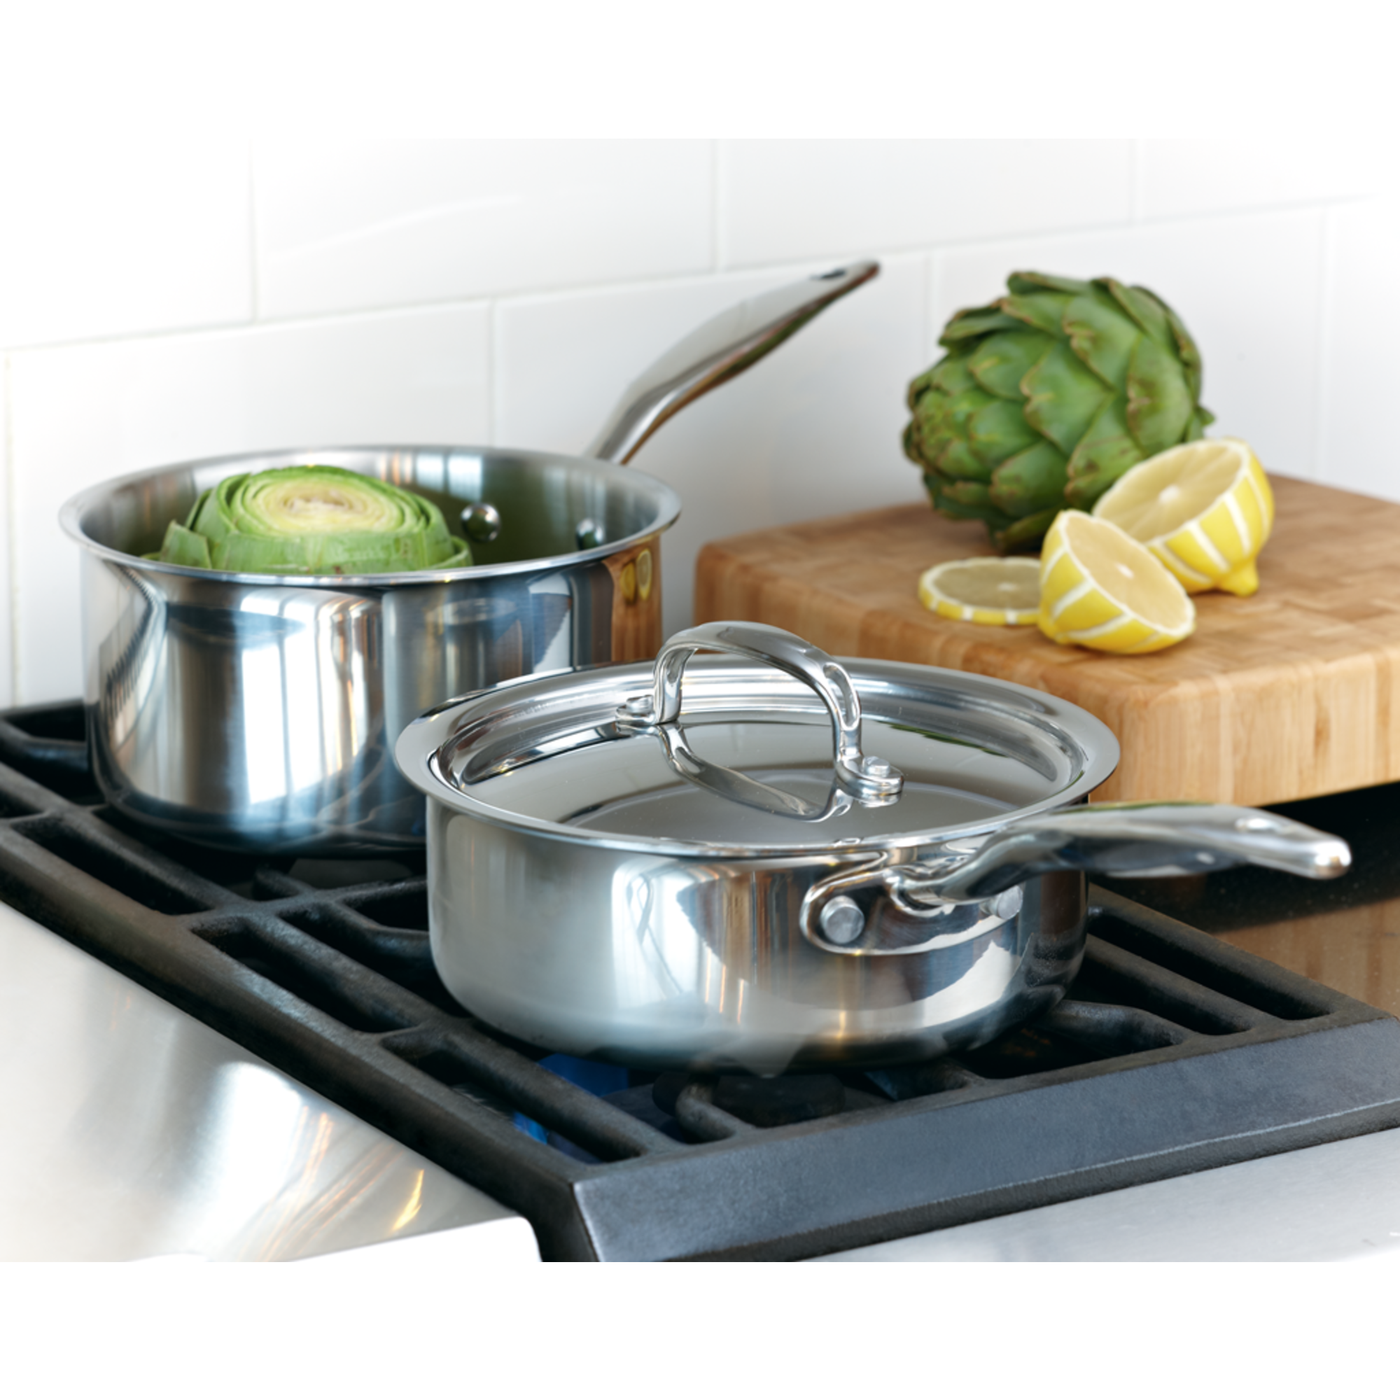 Stainless Steel 2 Quart Saucepan with cover - Liberty Tabletop